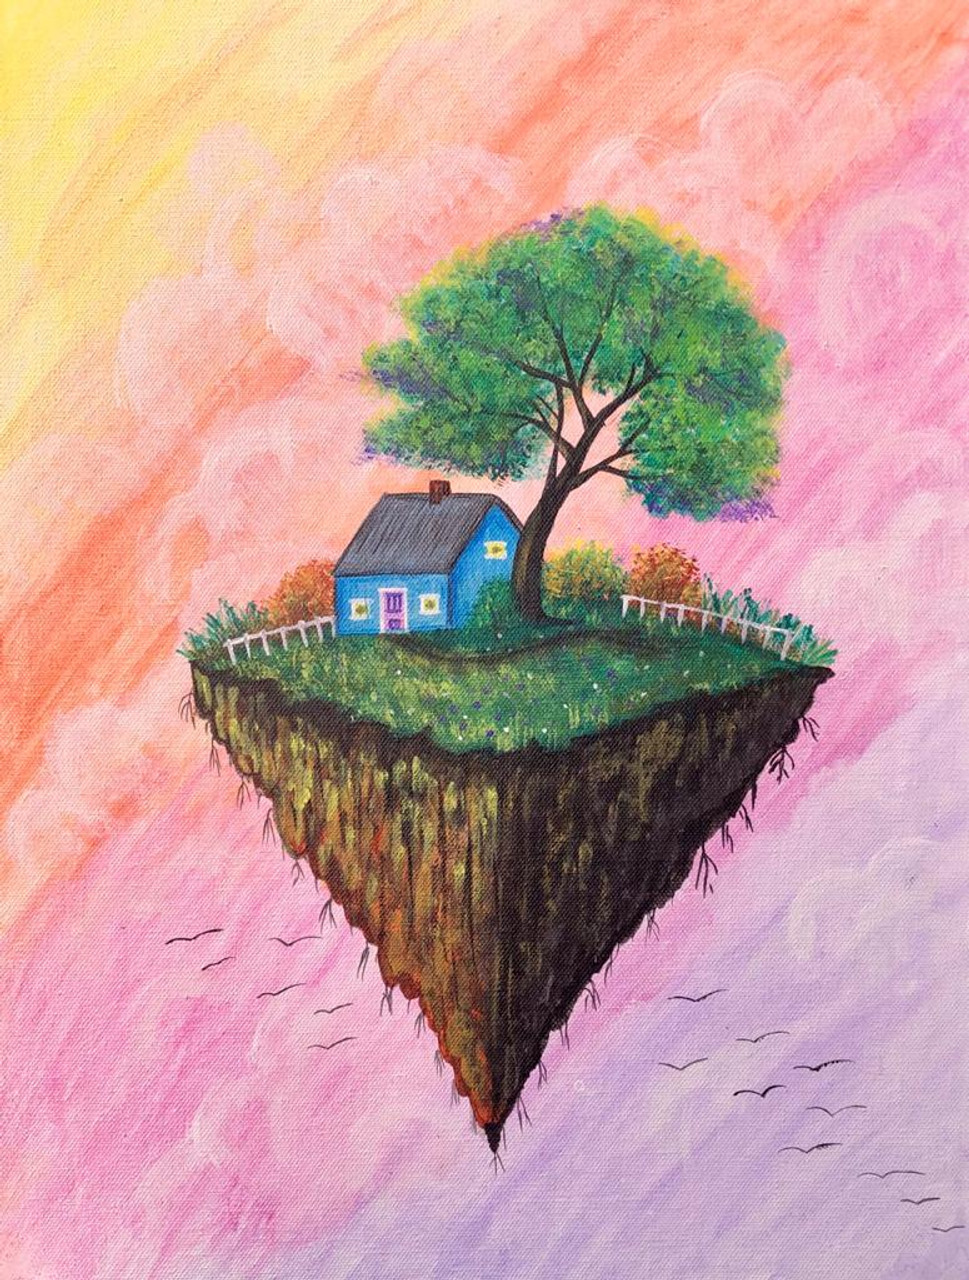 Buy Dreamy Flying beautiful island with lonely house Handmade ...